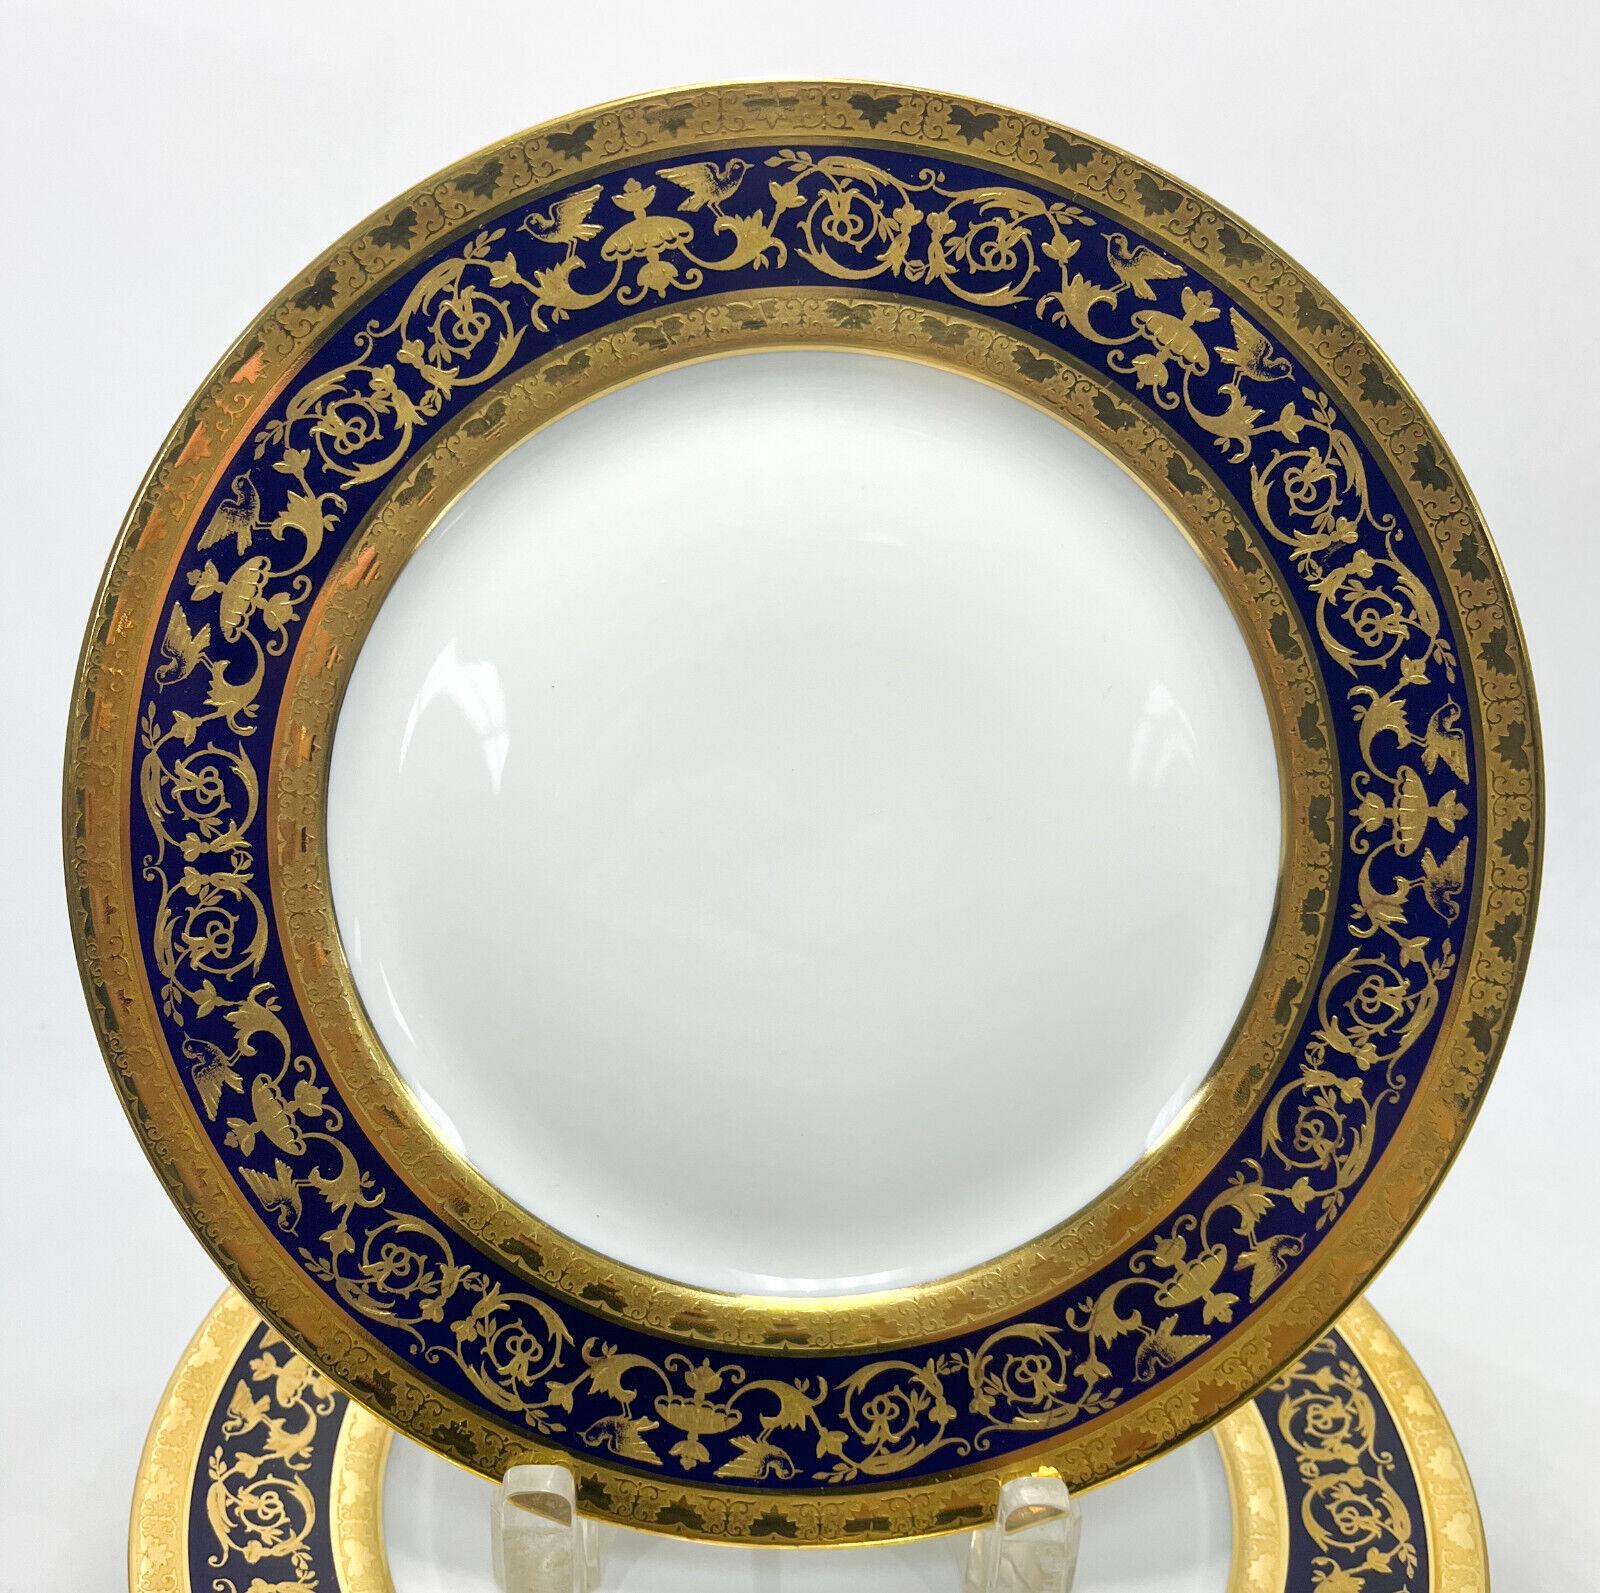 12 Limoges Raynaud porcelain dinner plates in Pompei. A cobalt blue ground with rich gilt birds and foliate scrolls.The “bleu de four” motifs taken from a sumptuous antique vase are hand-enhanced with fine gold.  Limoges Raynaud mark to underside.